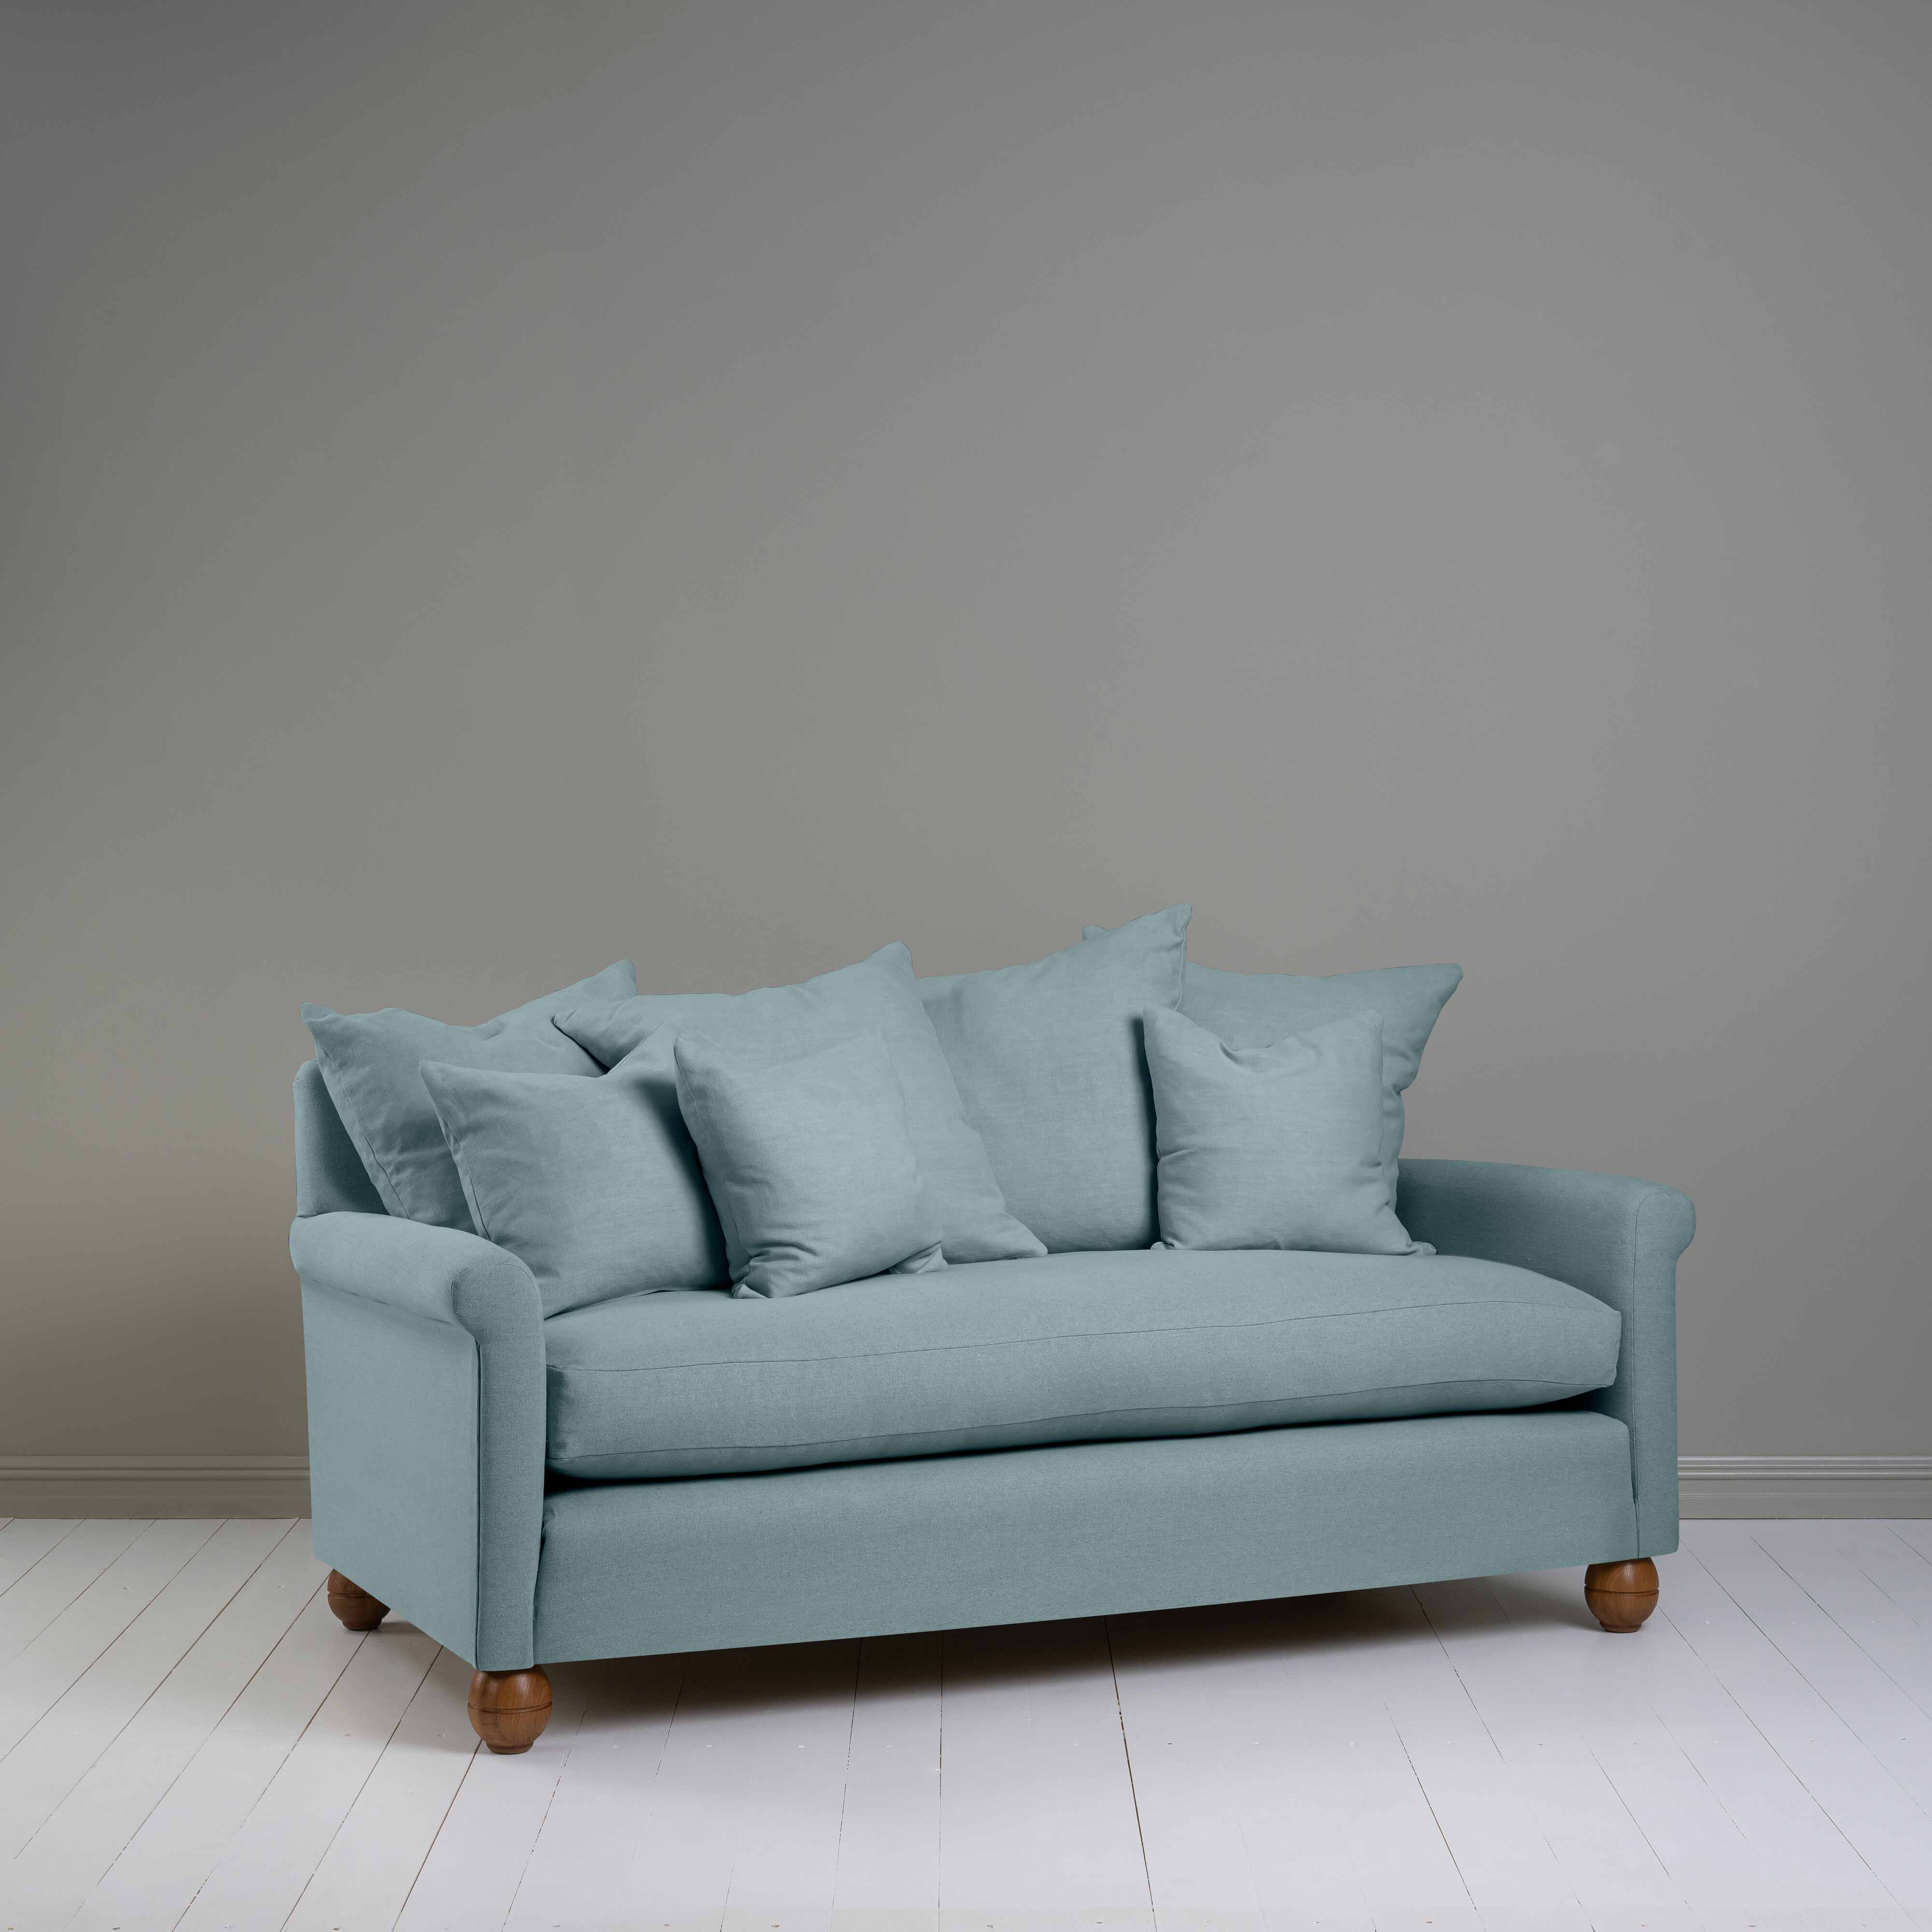  Idler 3 Seater Sofa in Laidback Linen Cerulean 